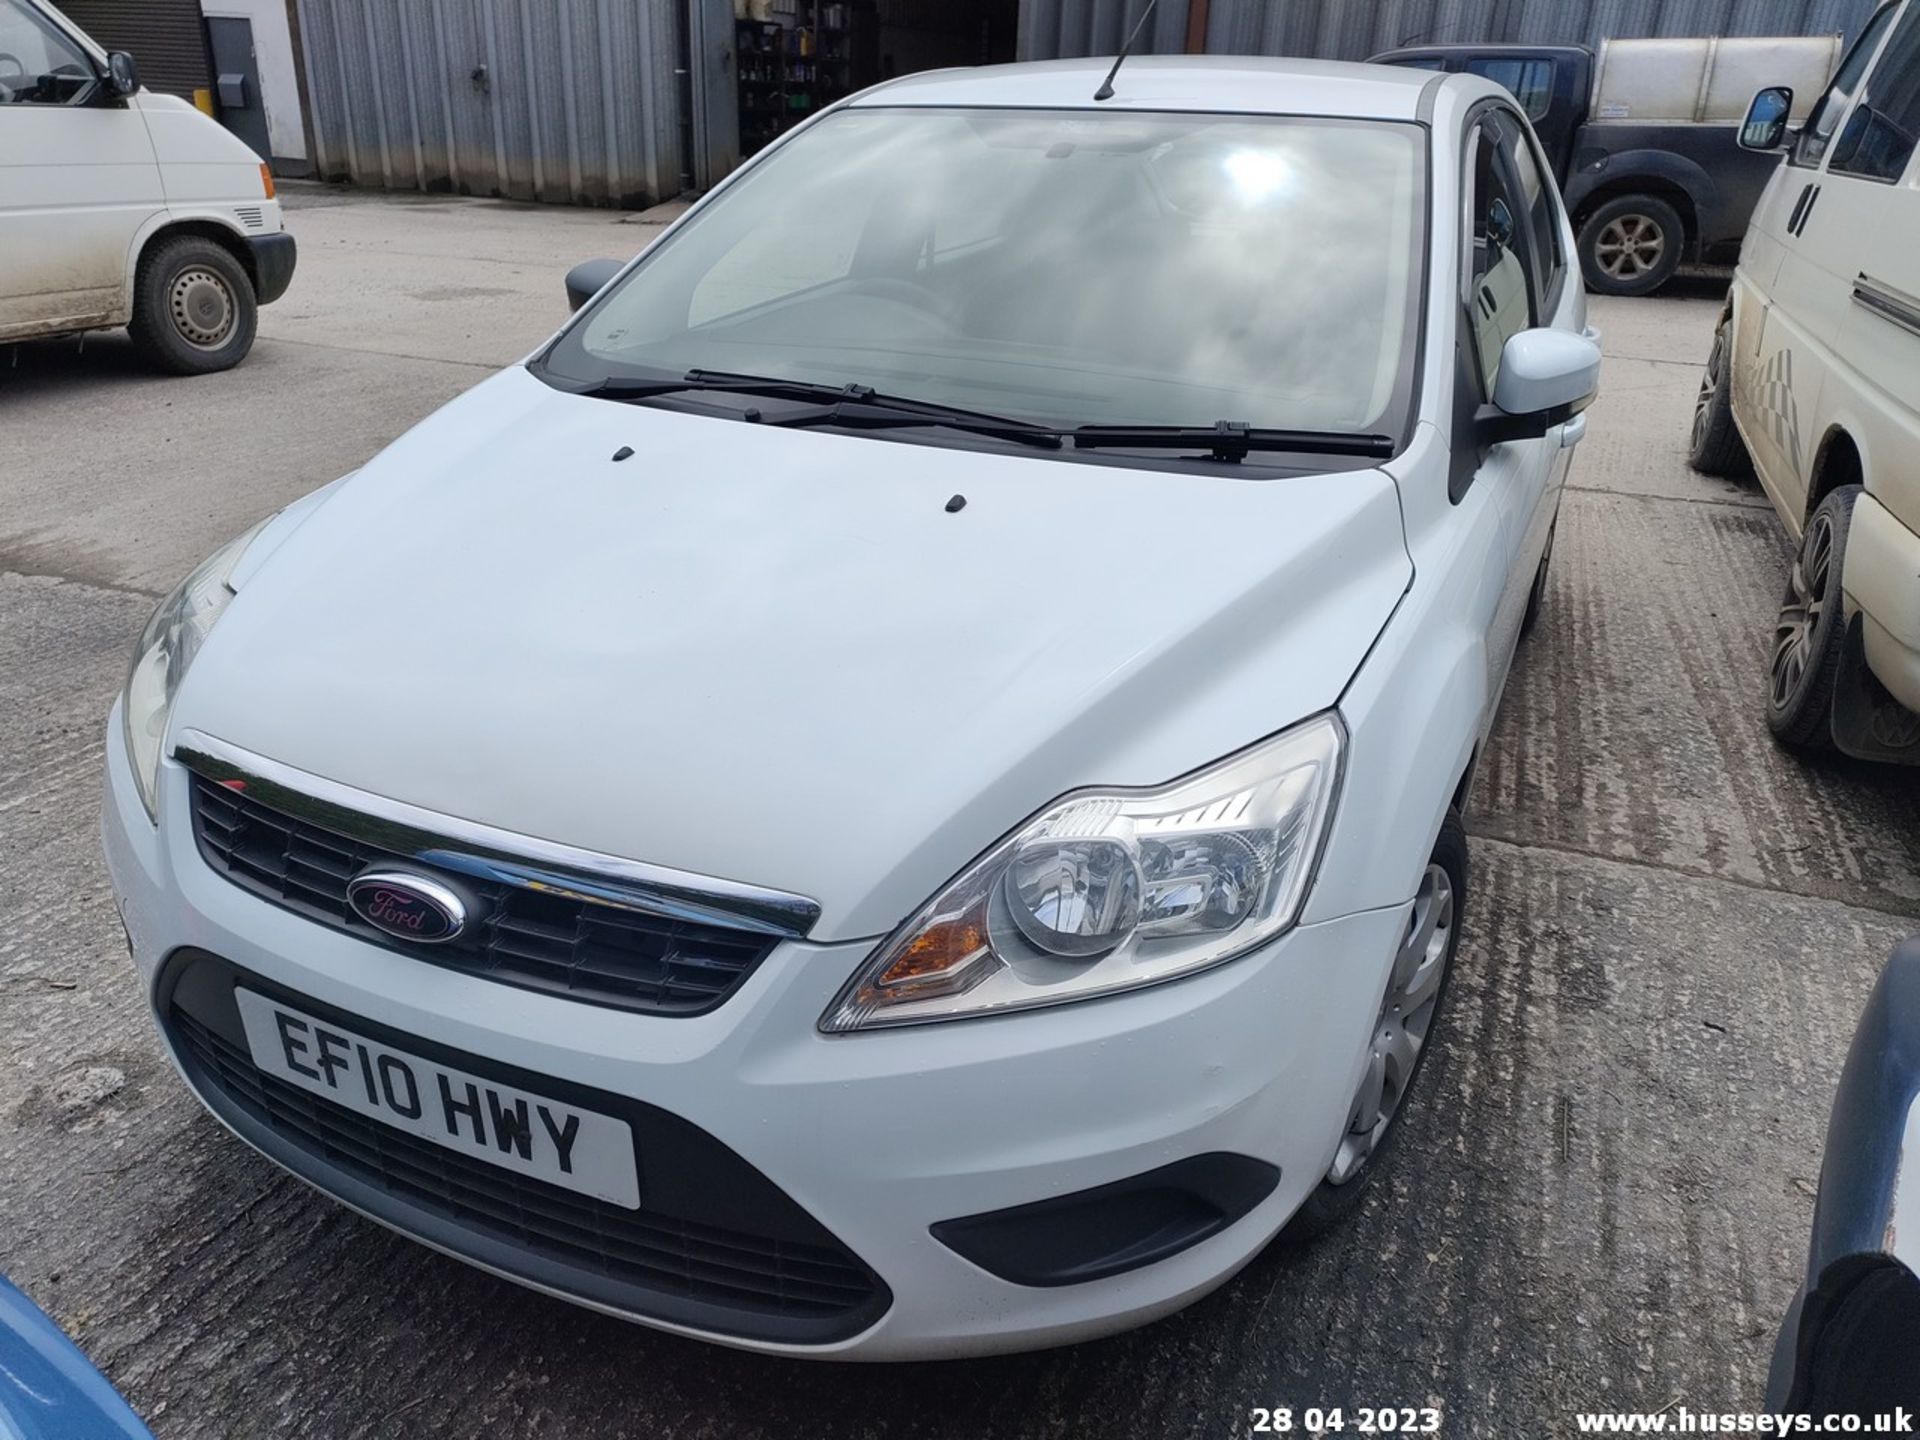 10/10 FORD FOCUS STYLE TDCI - 1560cc 5dr Hatchback (White) - Image 6 of 31